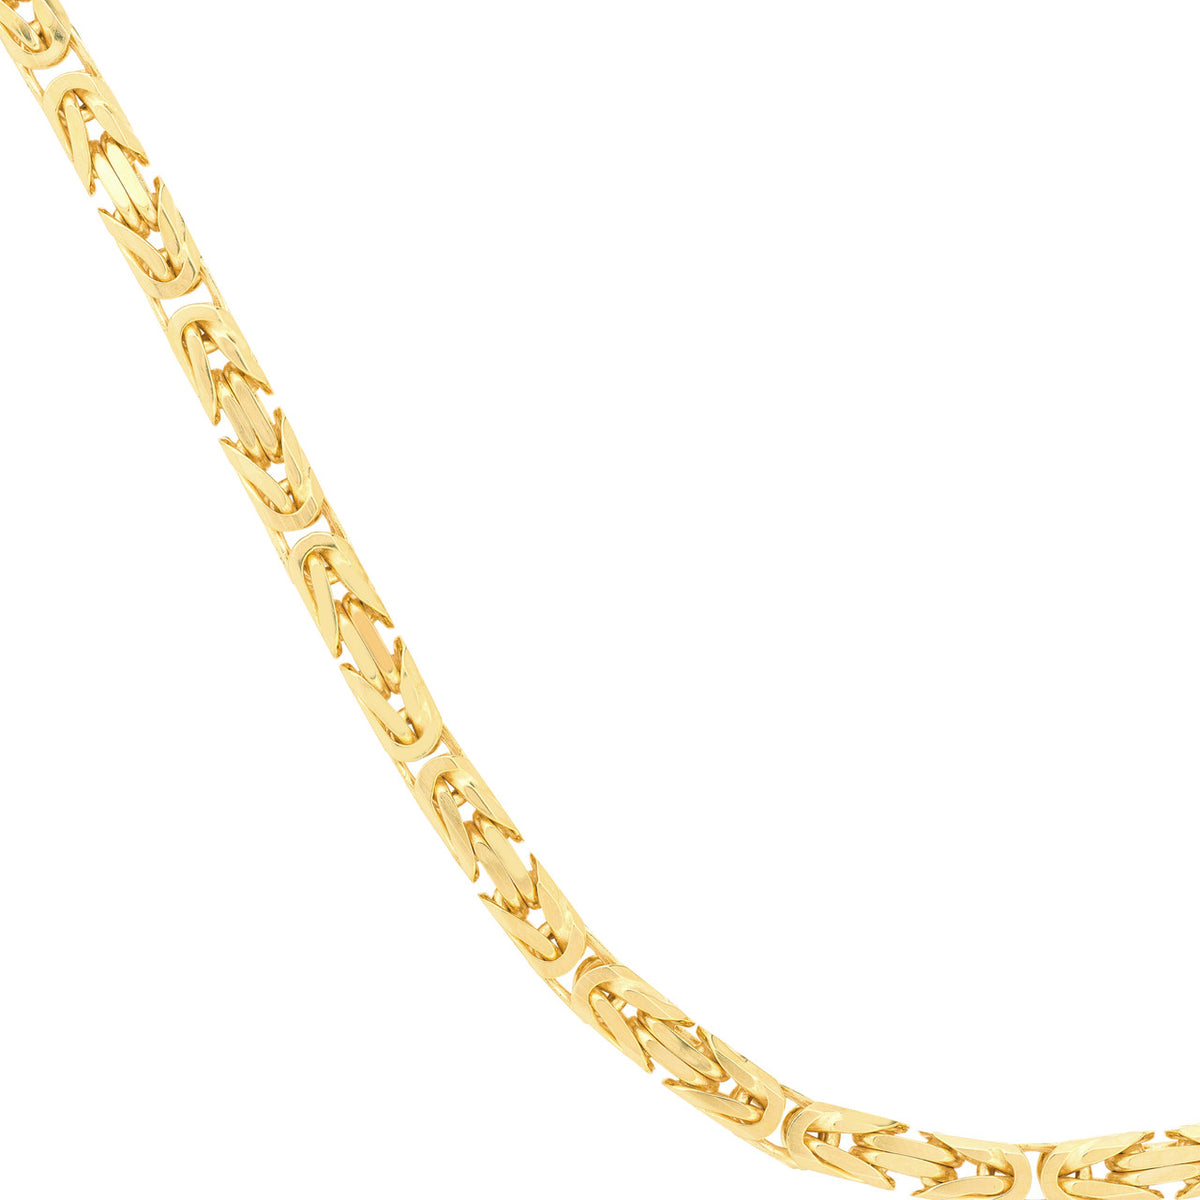 Solid 14K Yellow Gold 5.20mm Square Beveled Byzantine Chain Necklace